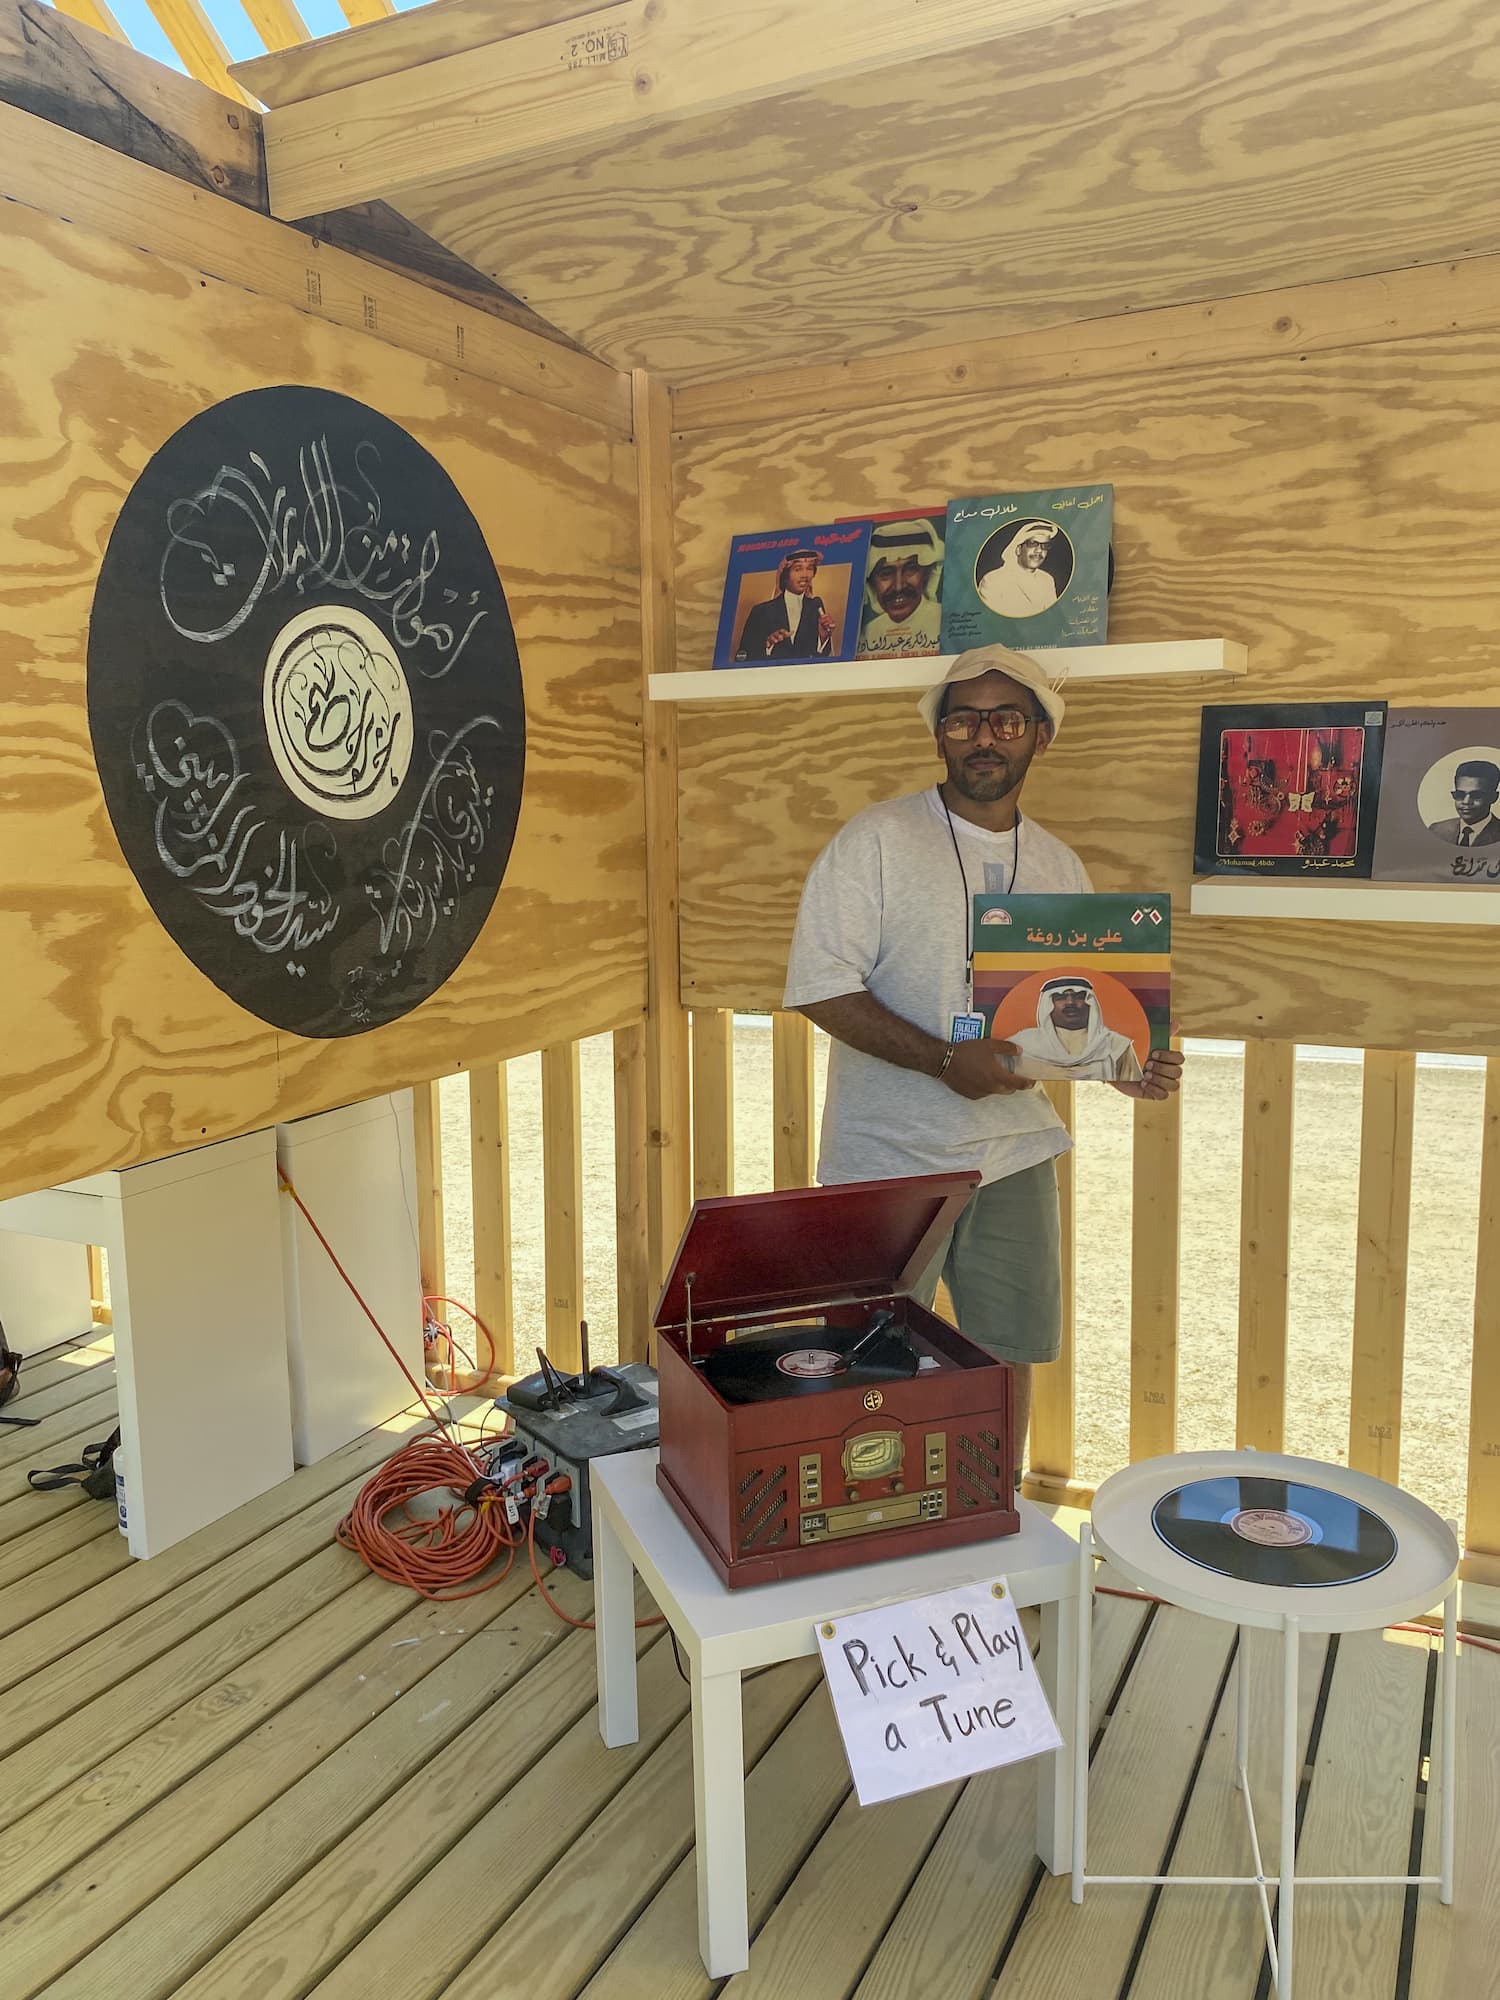 Mohamed Jneibi standing with a vinyl record collection